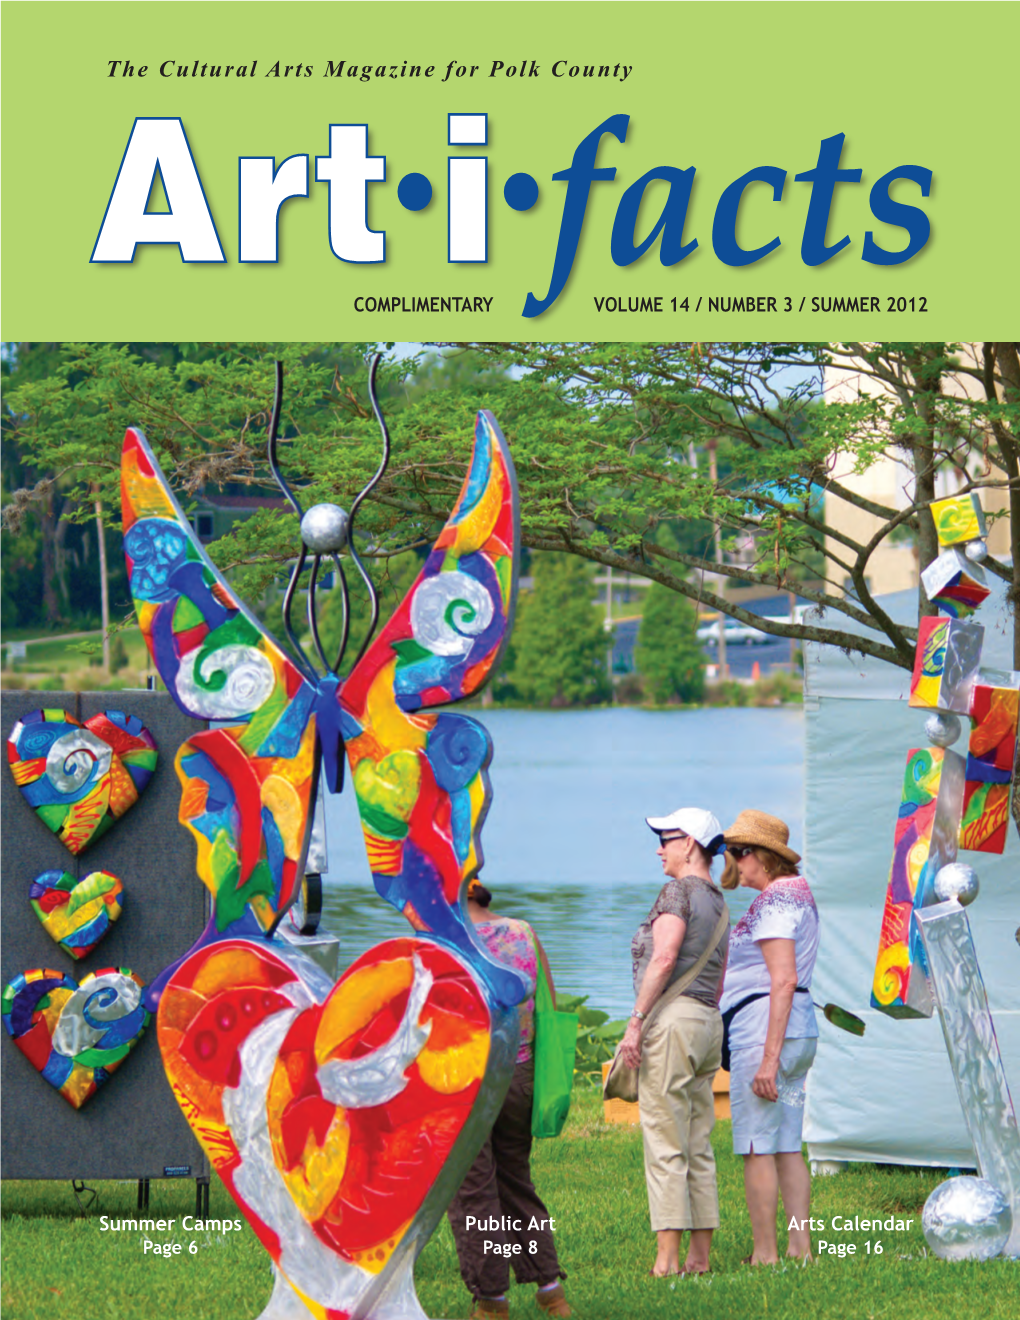 The Cultural Arts Magazine for Polk County